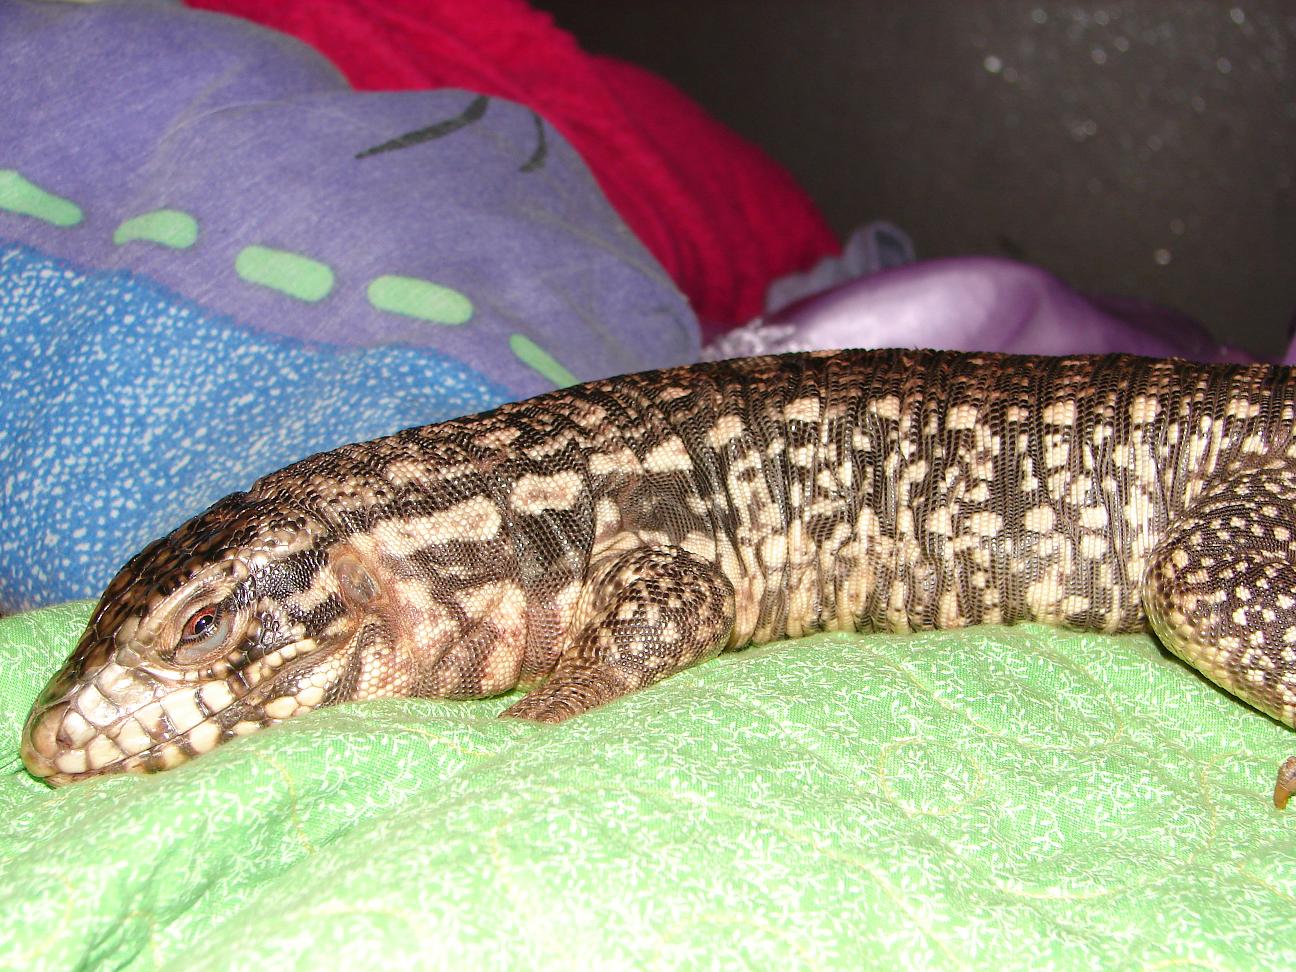 New Red Tegu